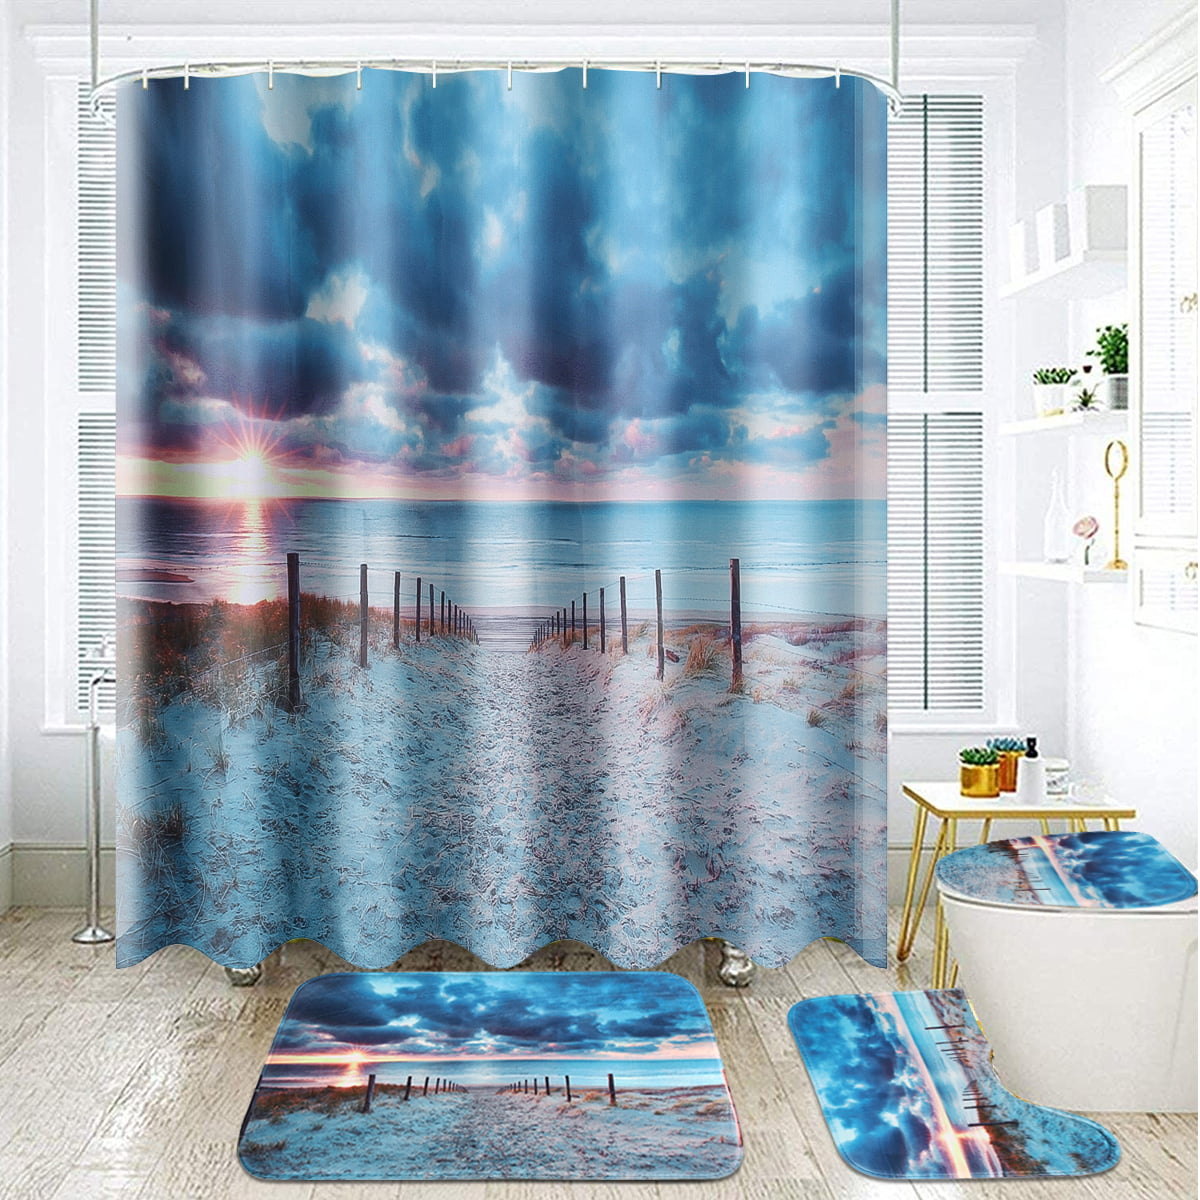 Waterproof Bathroom Shower Curtain Toilet Lid Cover Bath Mat Set For Home Hotel 